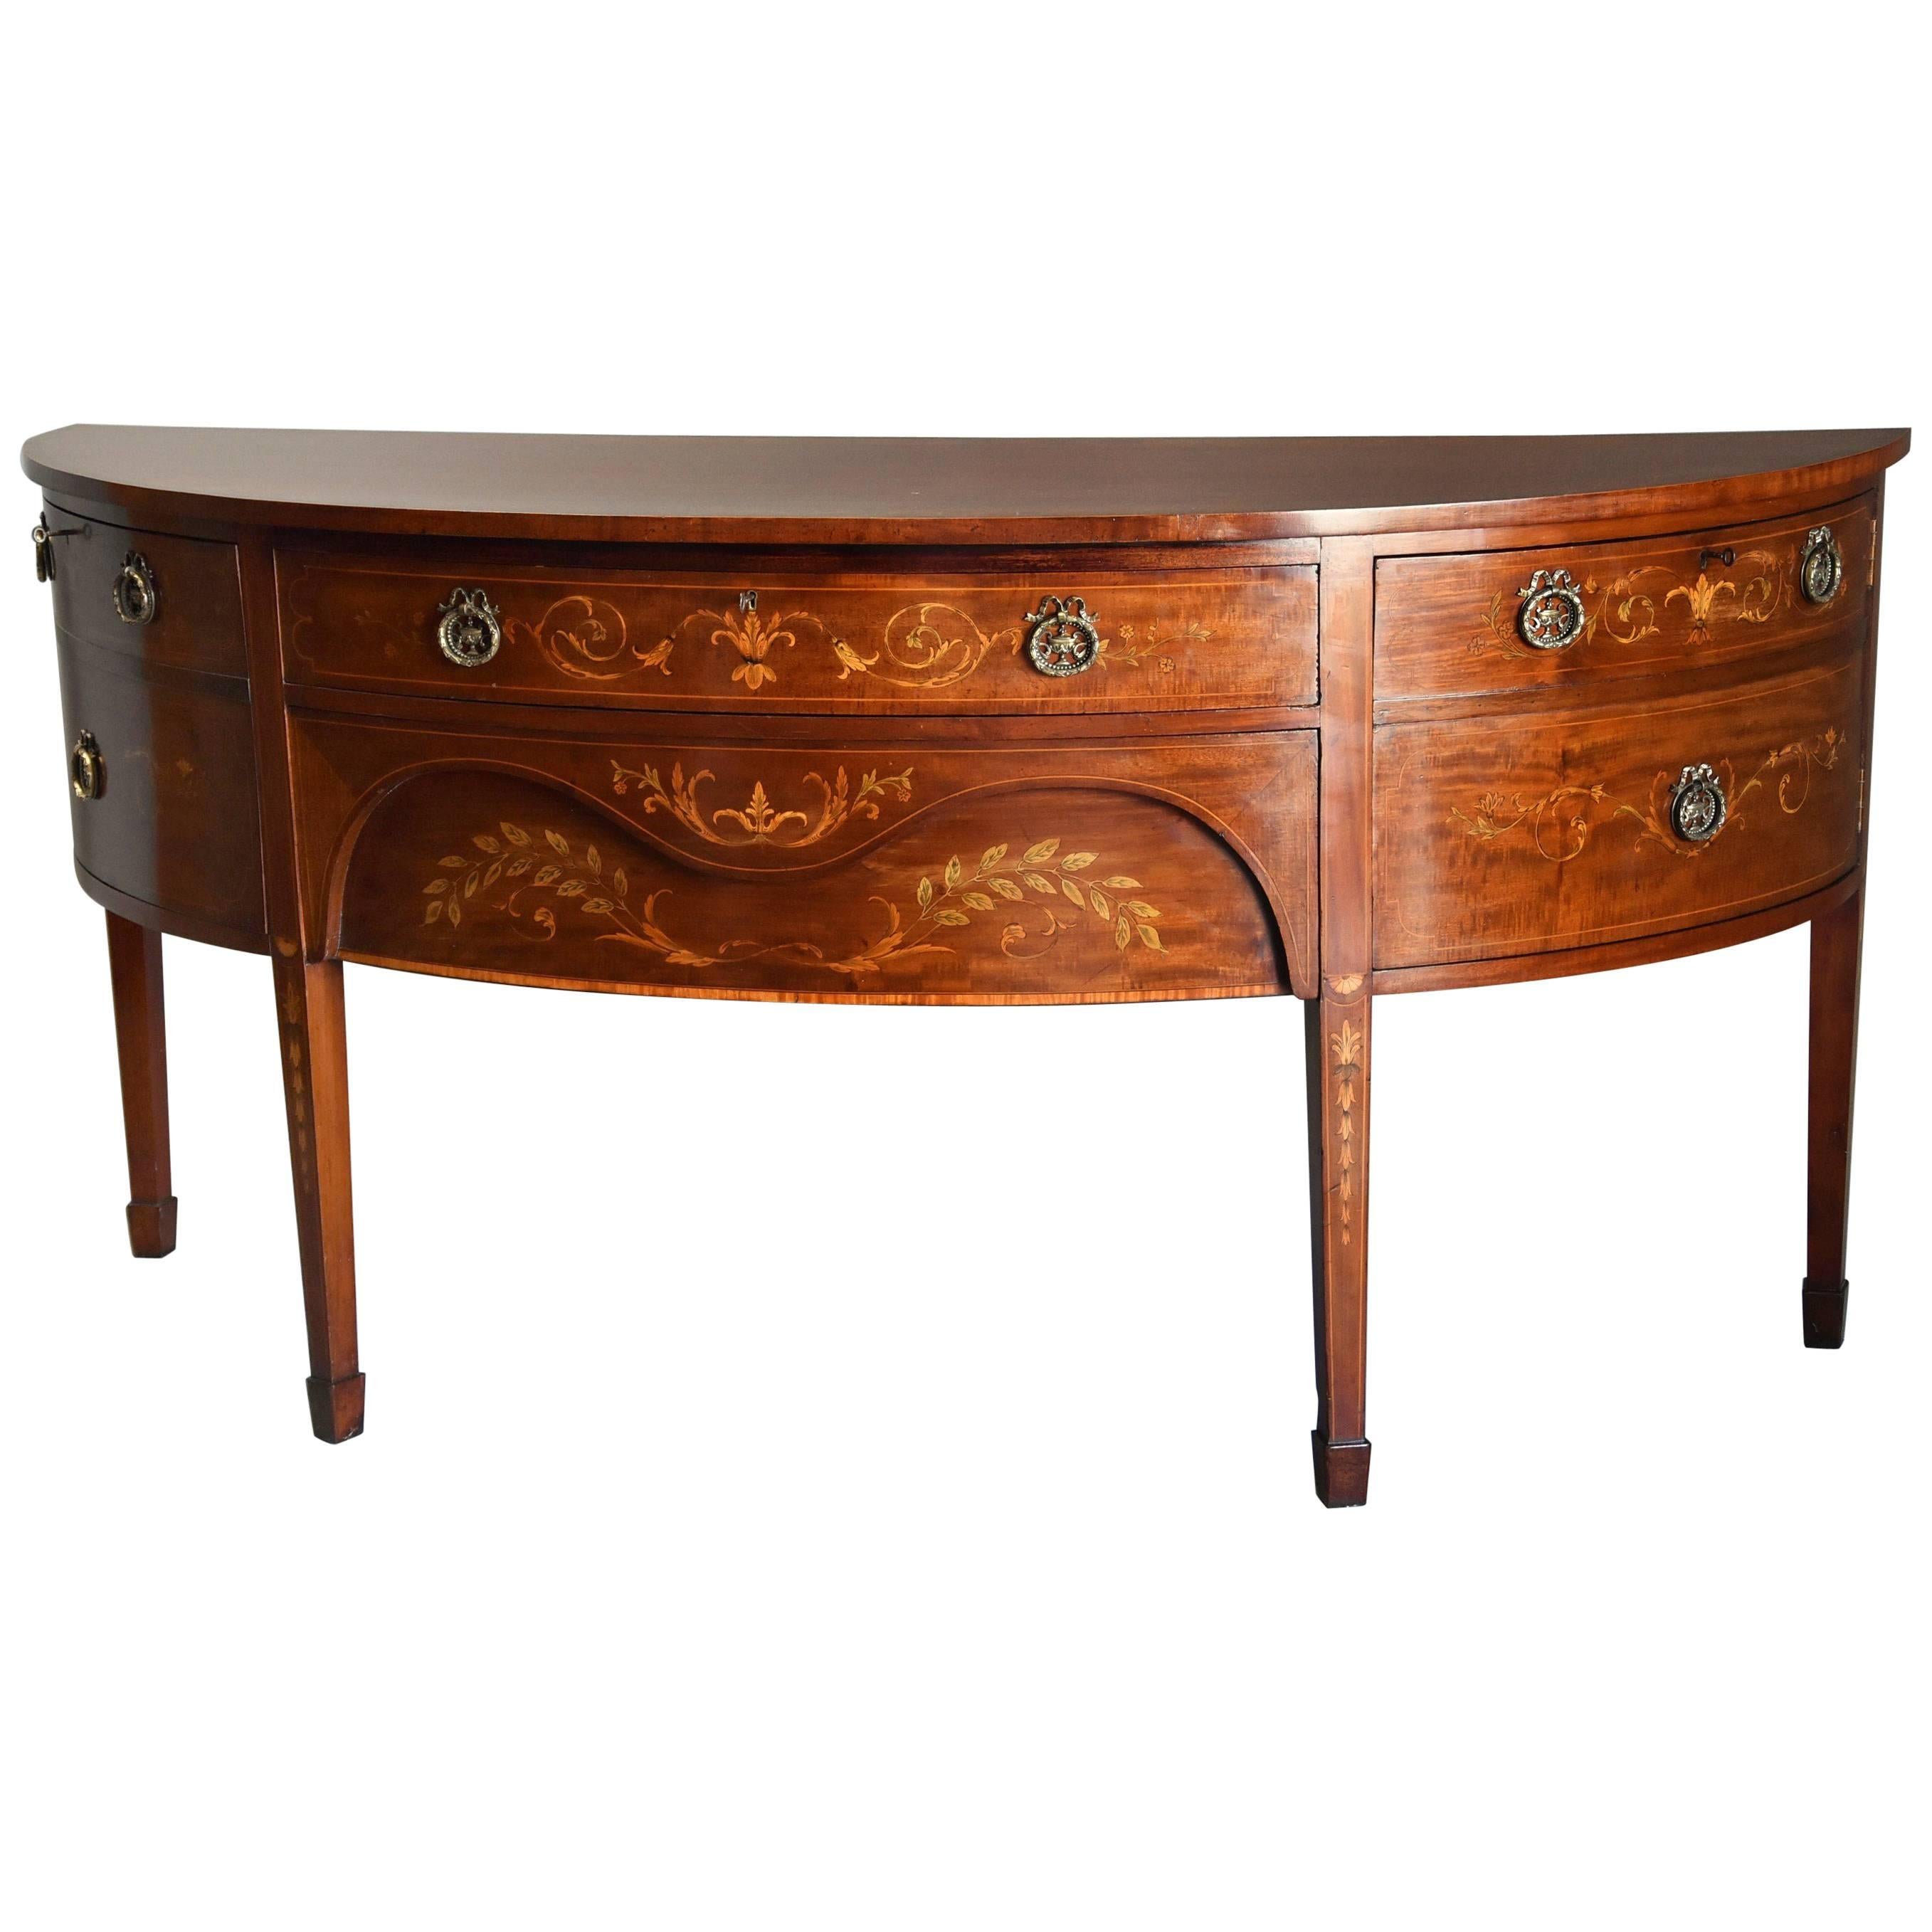 Fine Quality Edwardian Mahogany & Inlaid Bow Front Sideboard by Druce & Co